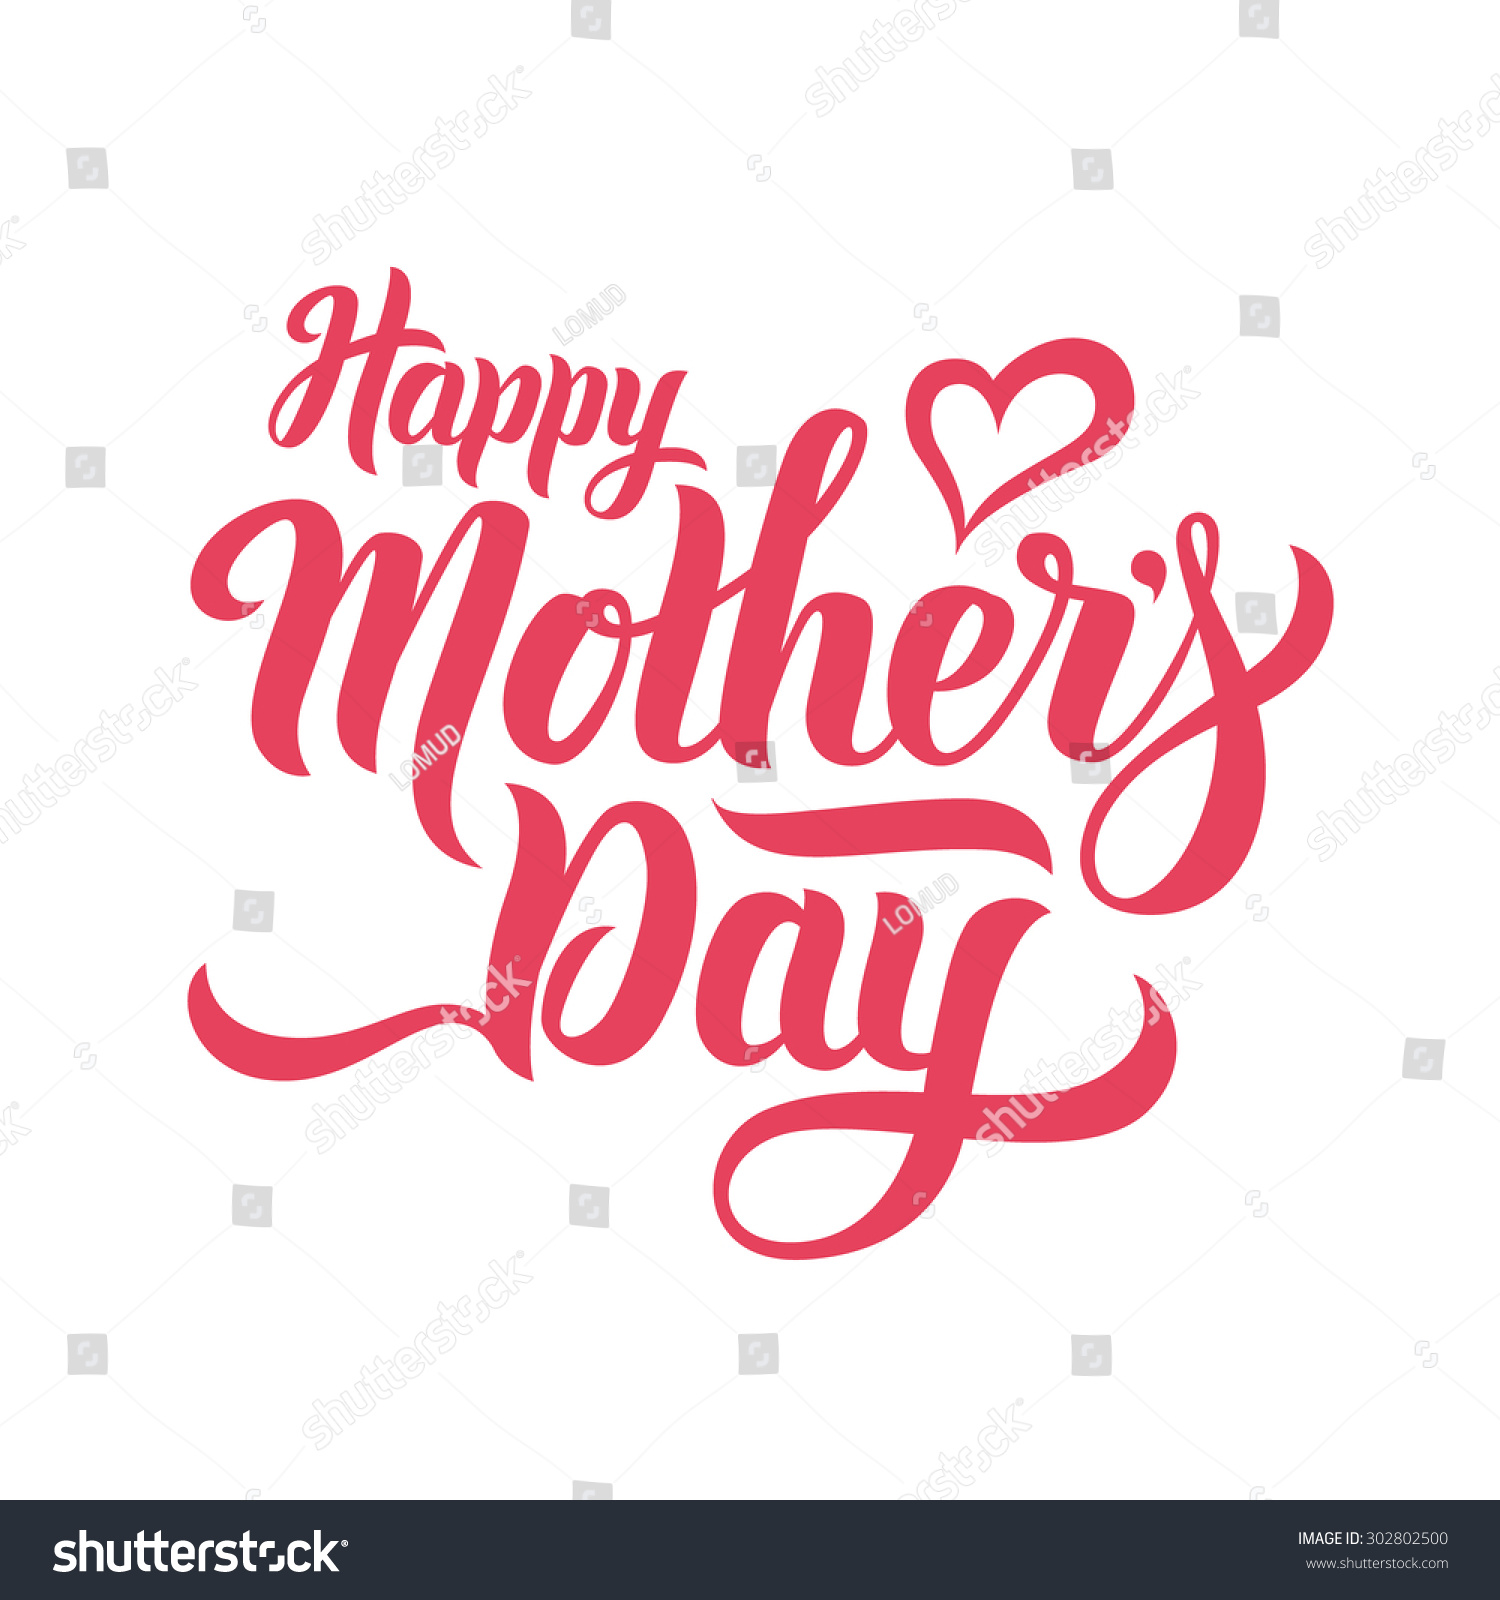 Happy Mothers Day lettering. Handmade calligraphy vector illustration. Mother's day card with heart #302802500